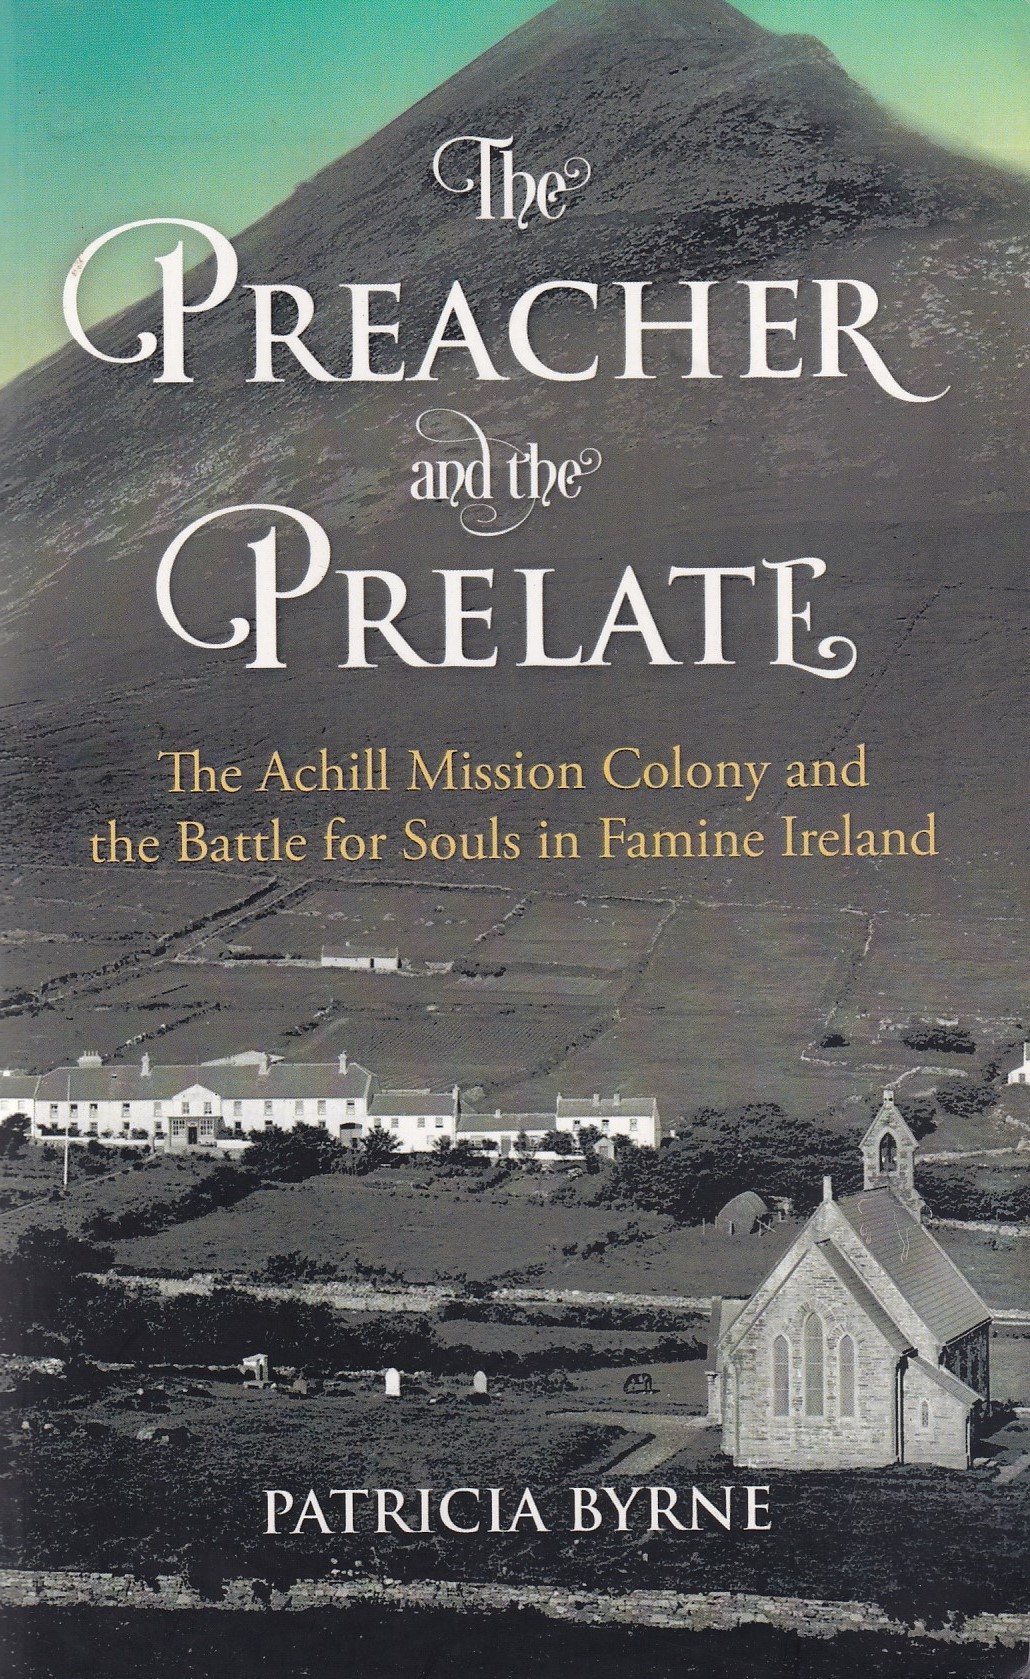 The Preacher and the Prelate: The Achill Mission Colony and the Battle for Souls in Famine Ireland | Patricia Byrne | Charlie Byrne's